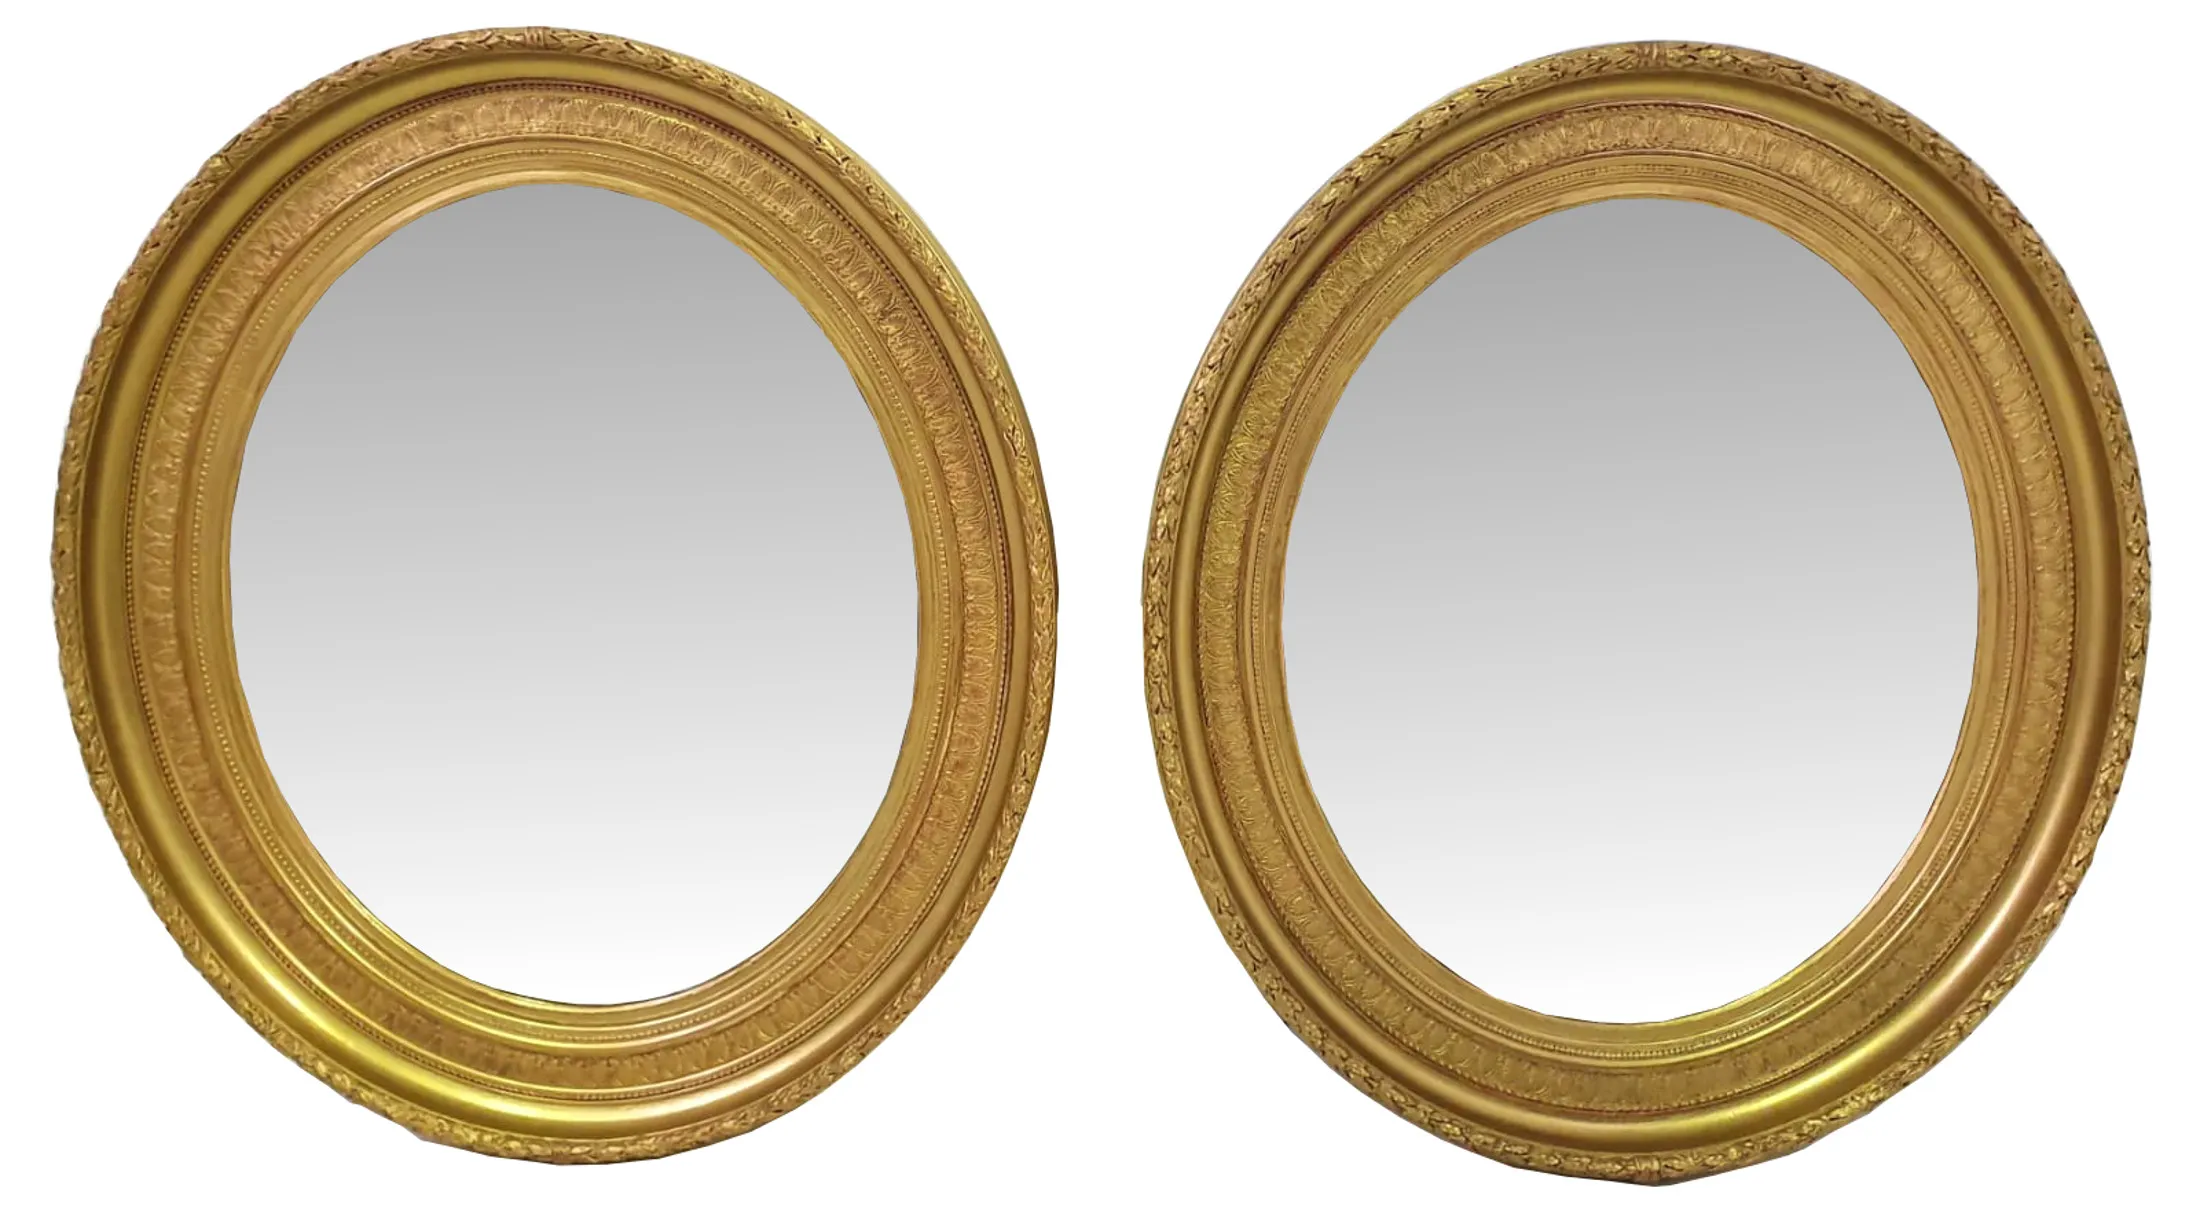 Pair of 19th Century Gilt Oval Mirrors